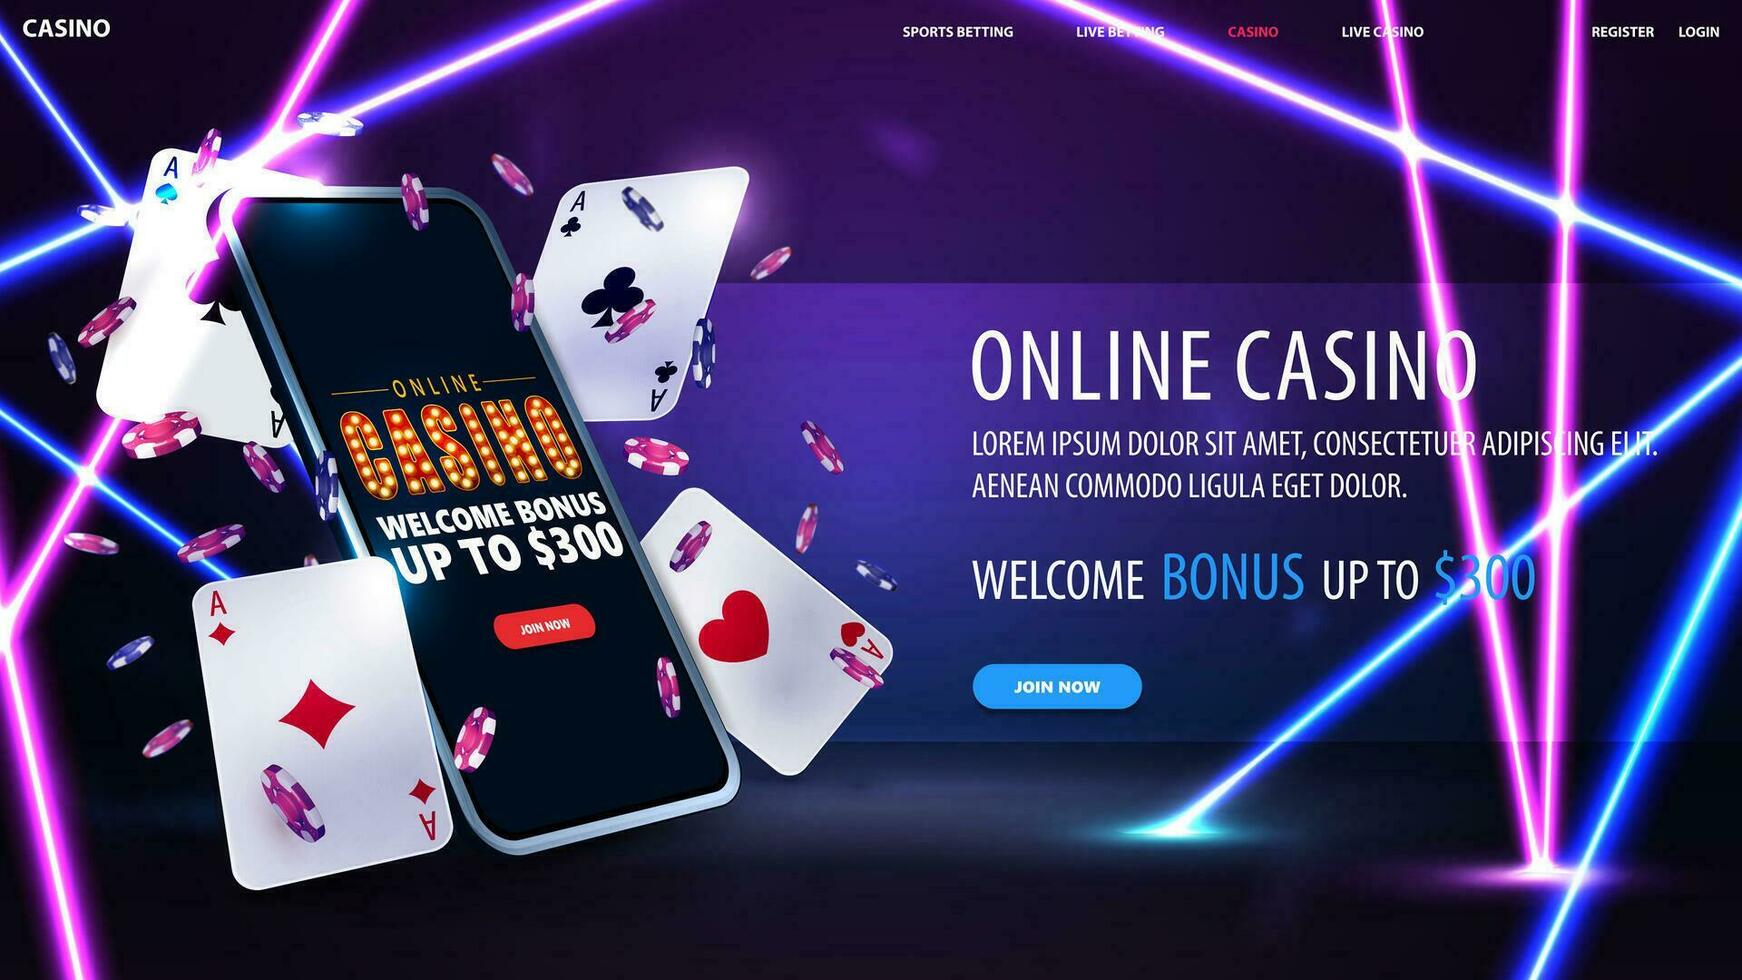 Online casino, banner for website with button, smartphone, poker chips and playing cards in purple scene with blue and pink neon line rays vector